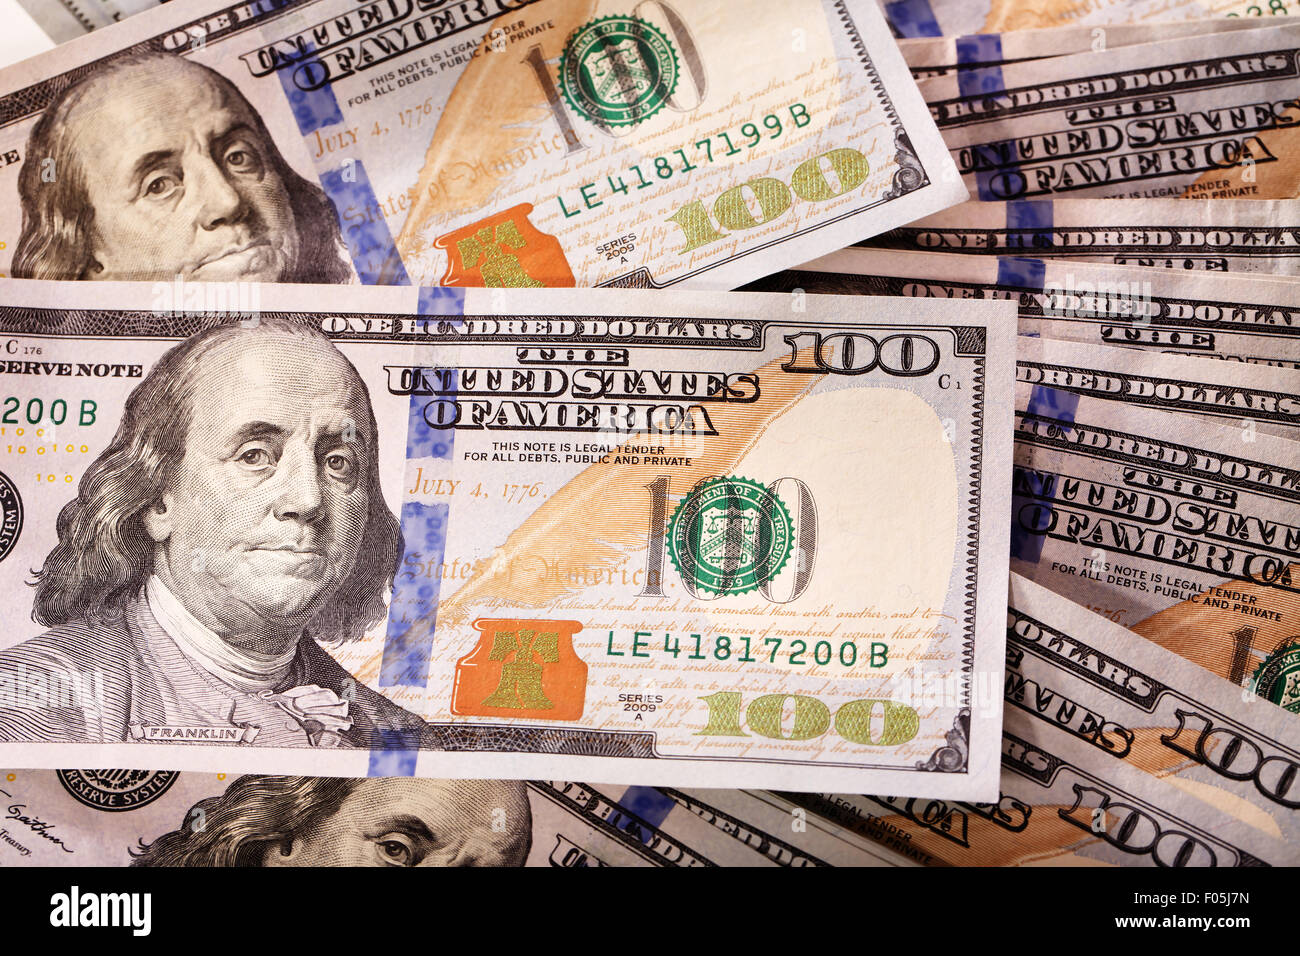 Cash spread of new hundred-dollar bills (in circulation since Oct 2013) Stock Photo